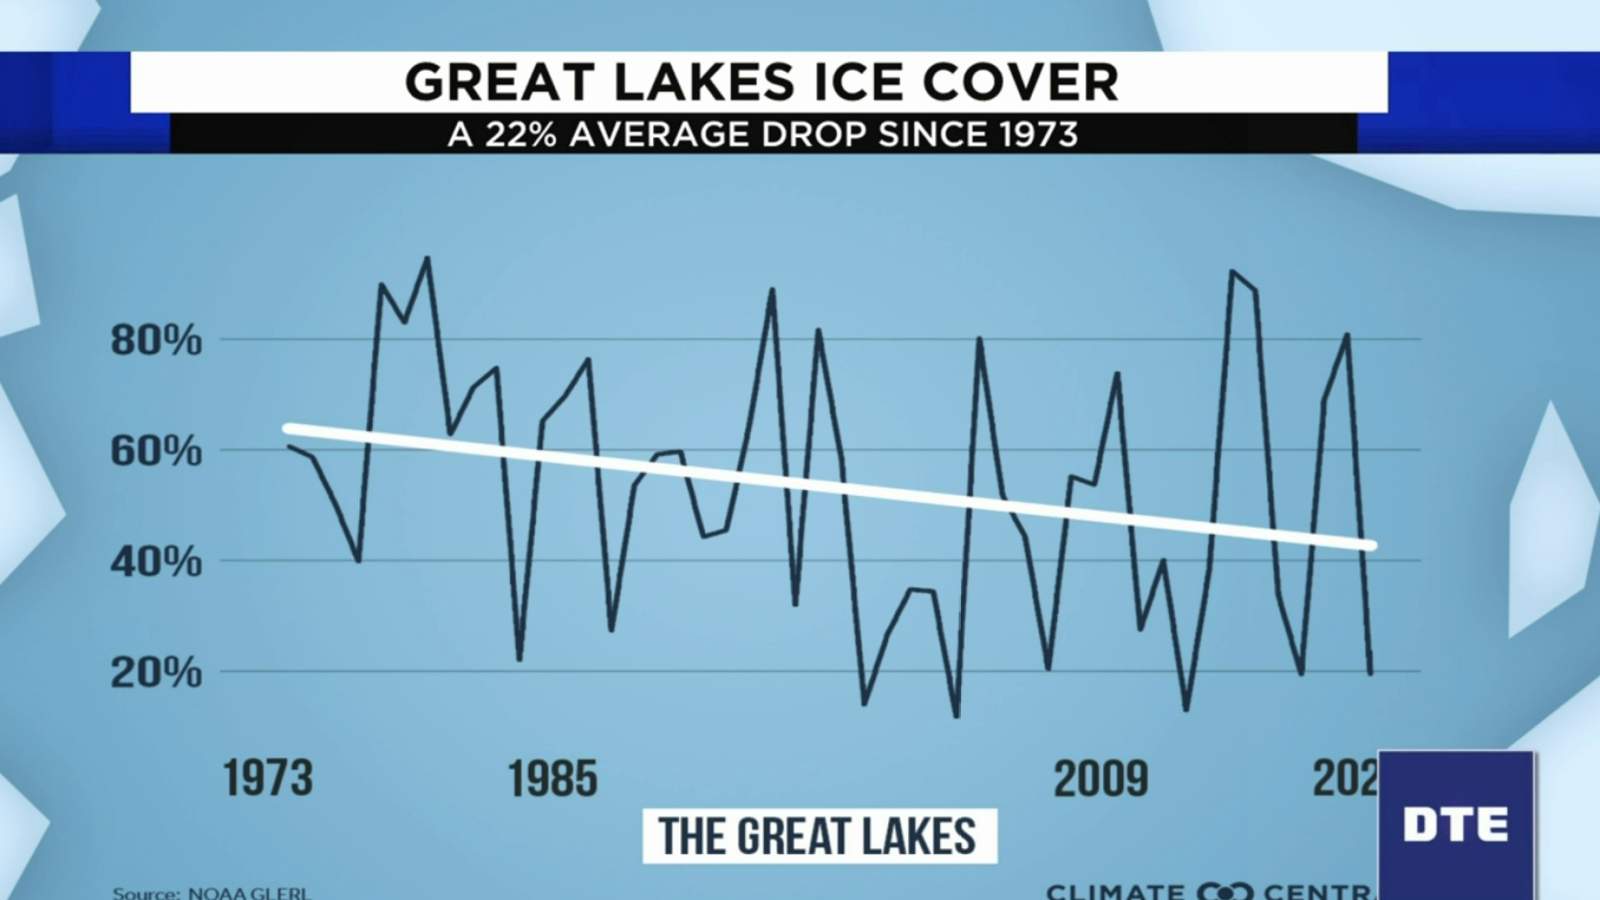 Great Lakes ice cover: Down 22% on average since 1973